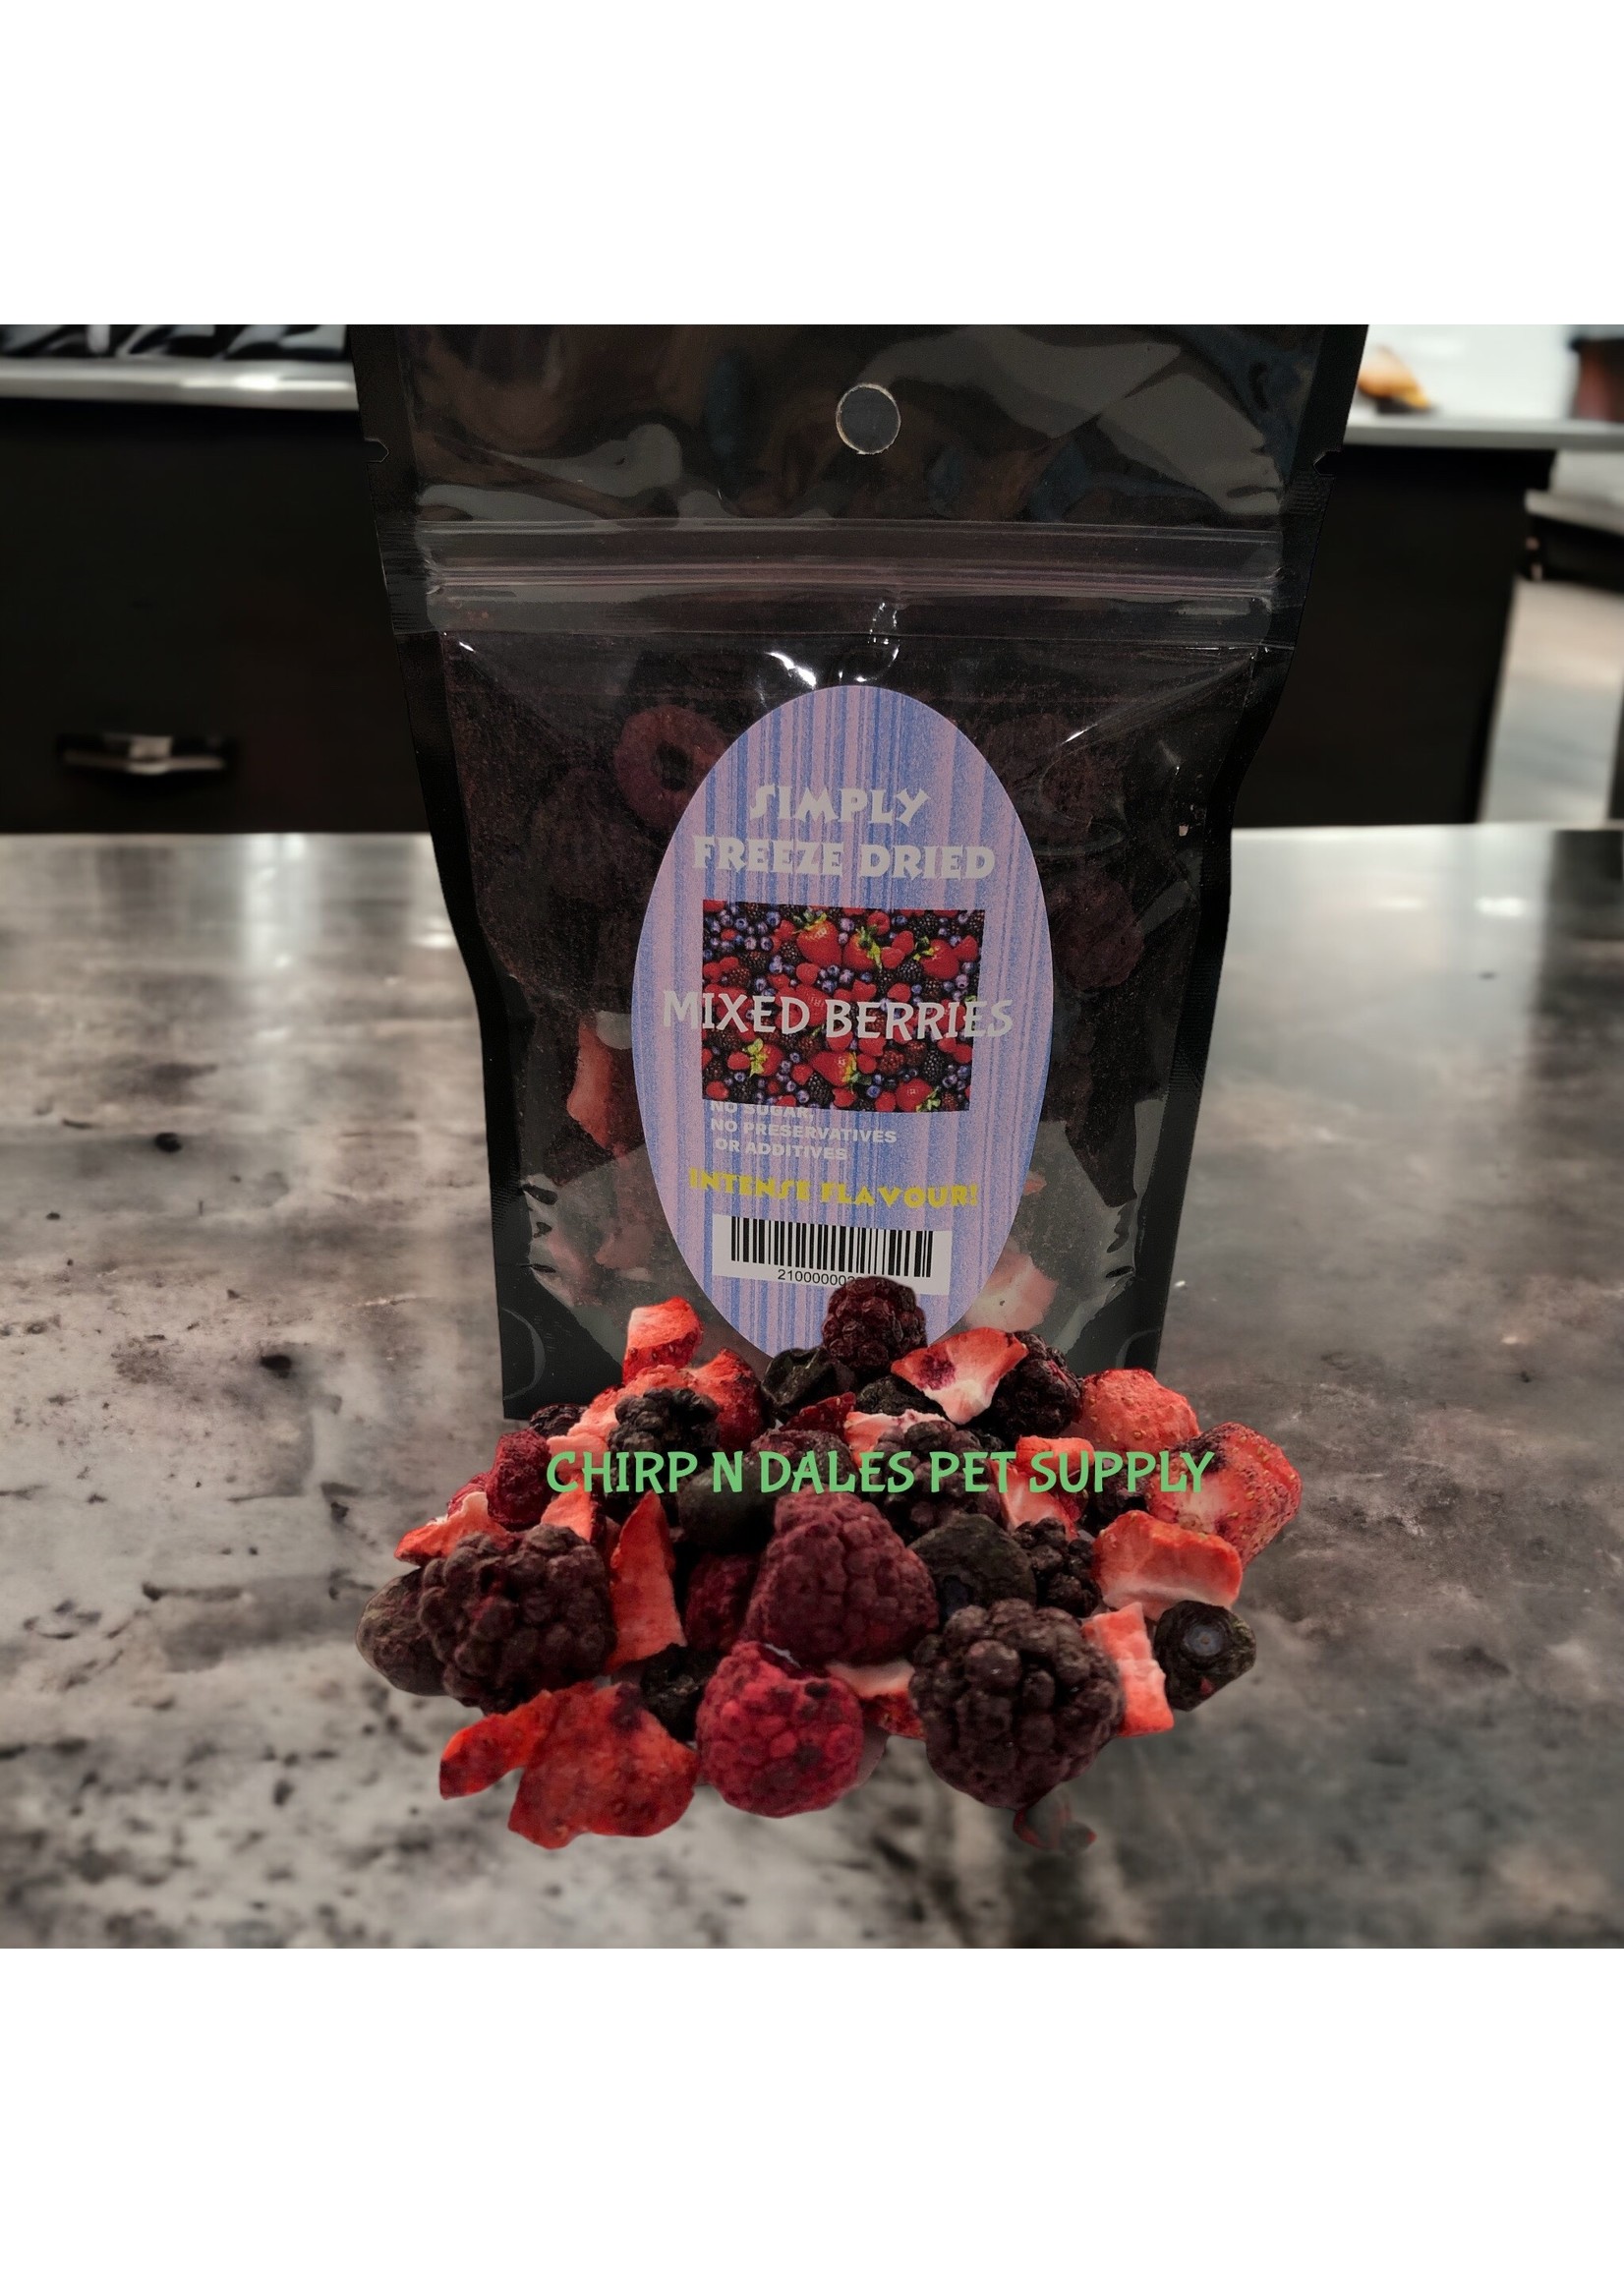 CND Freeze Dried Products Simply Freeze Dried Mixed Berries 18 g